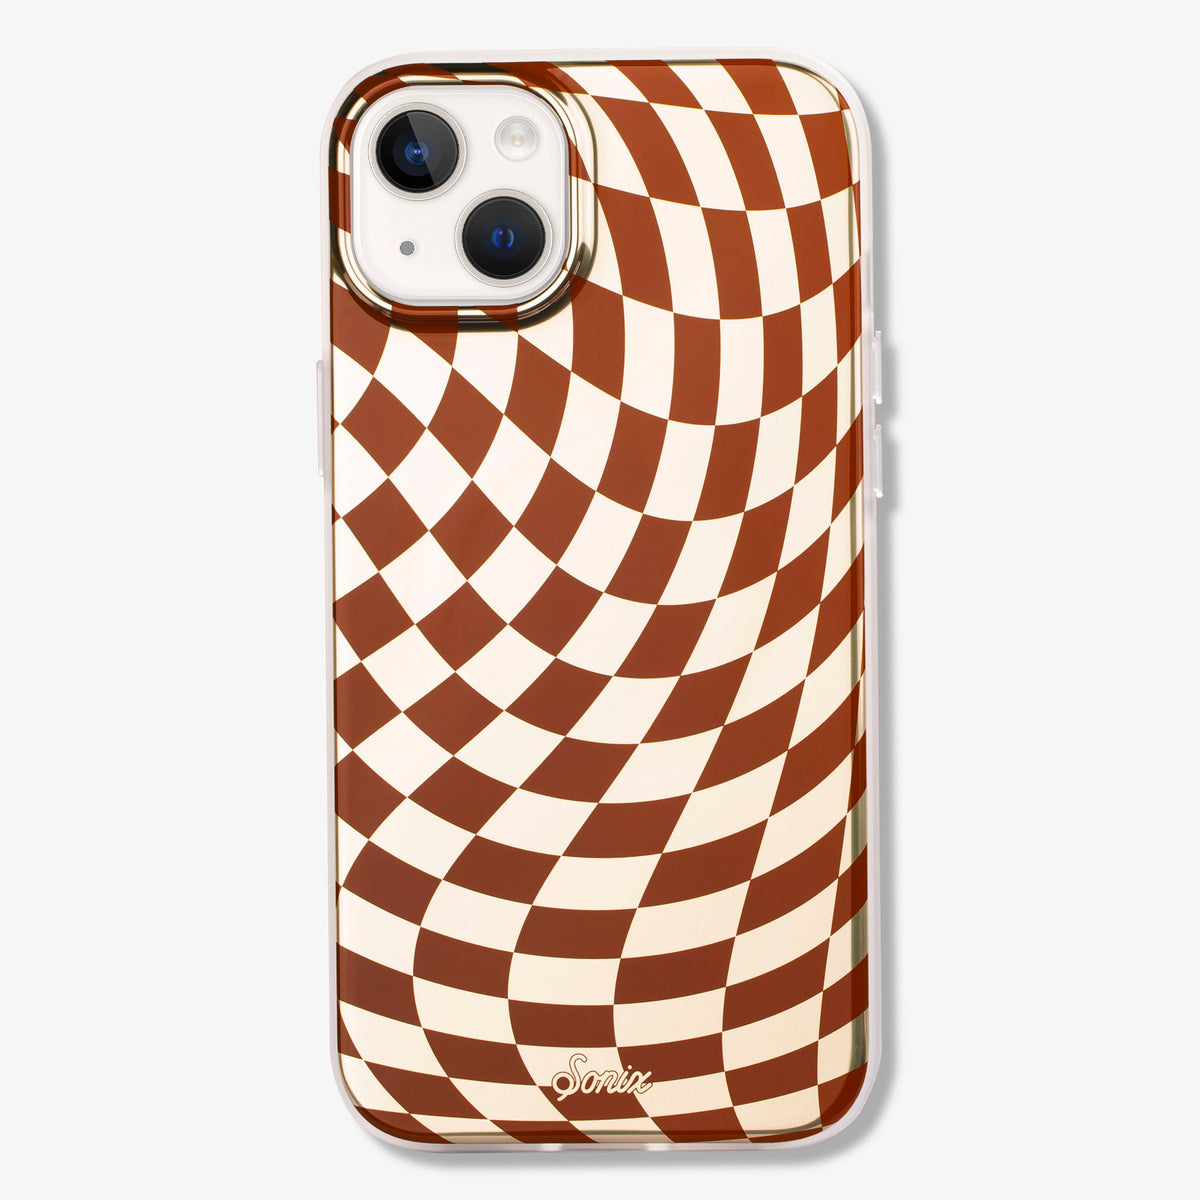 Black Checkered Phone Case Trendy Checkerboard Print Cover for